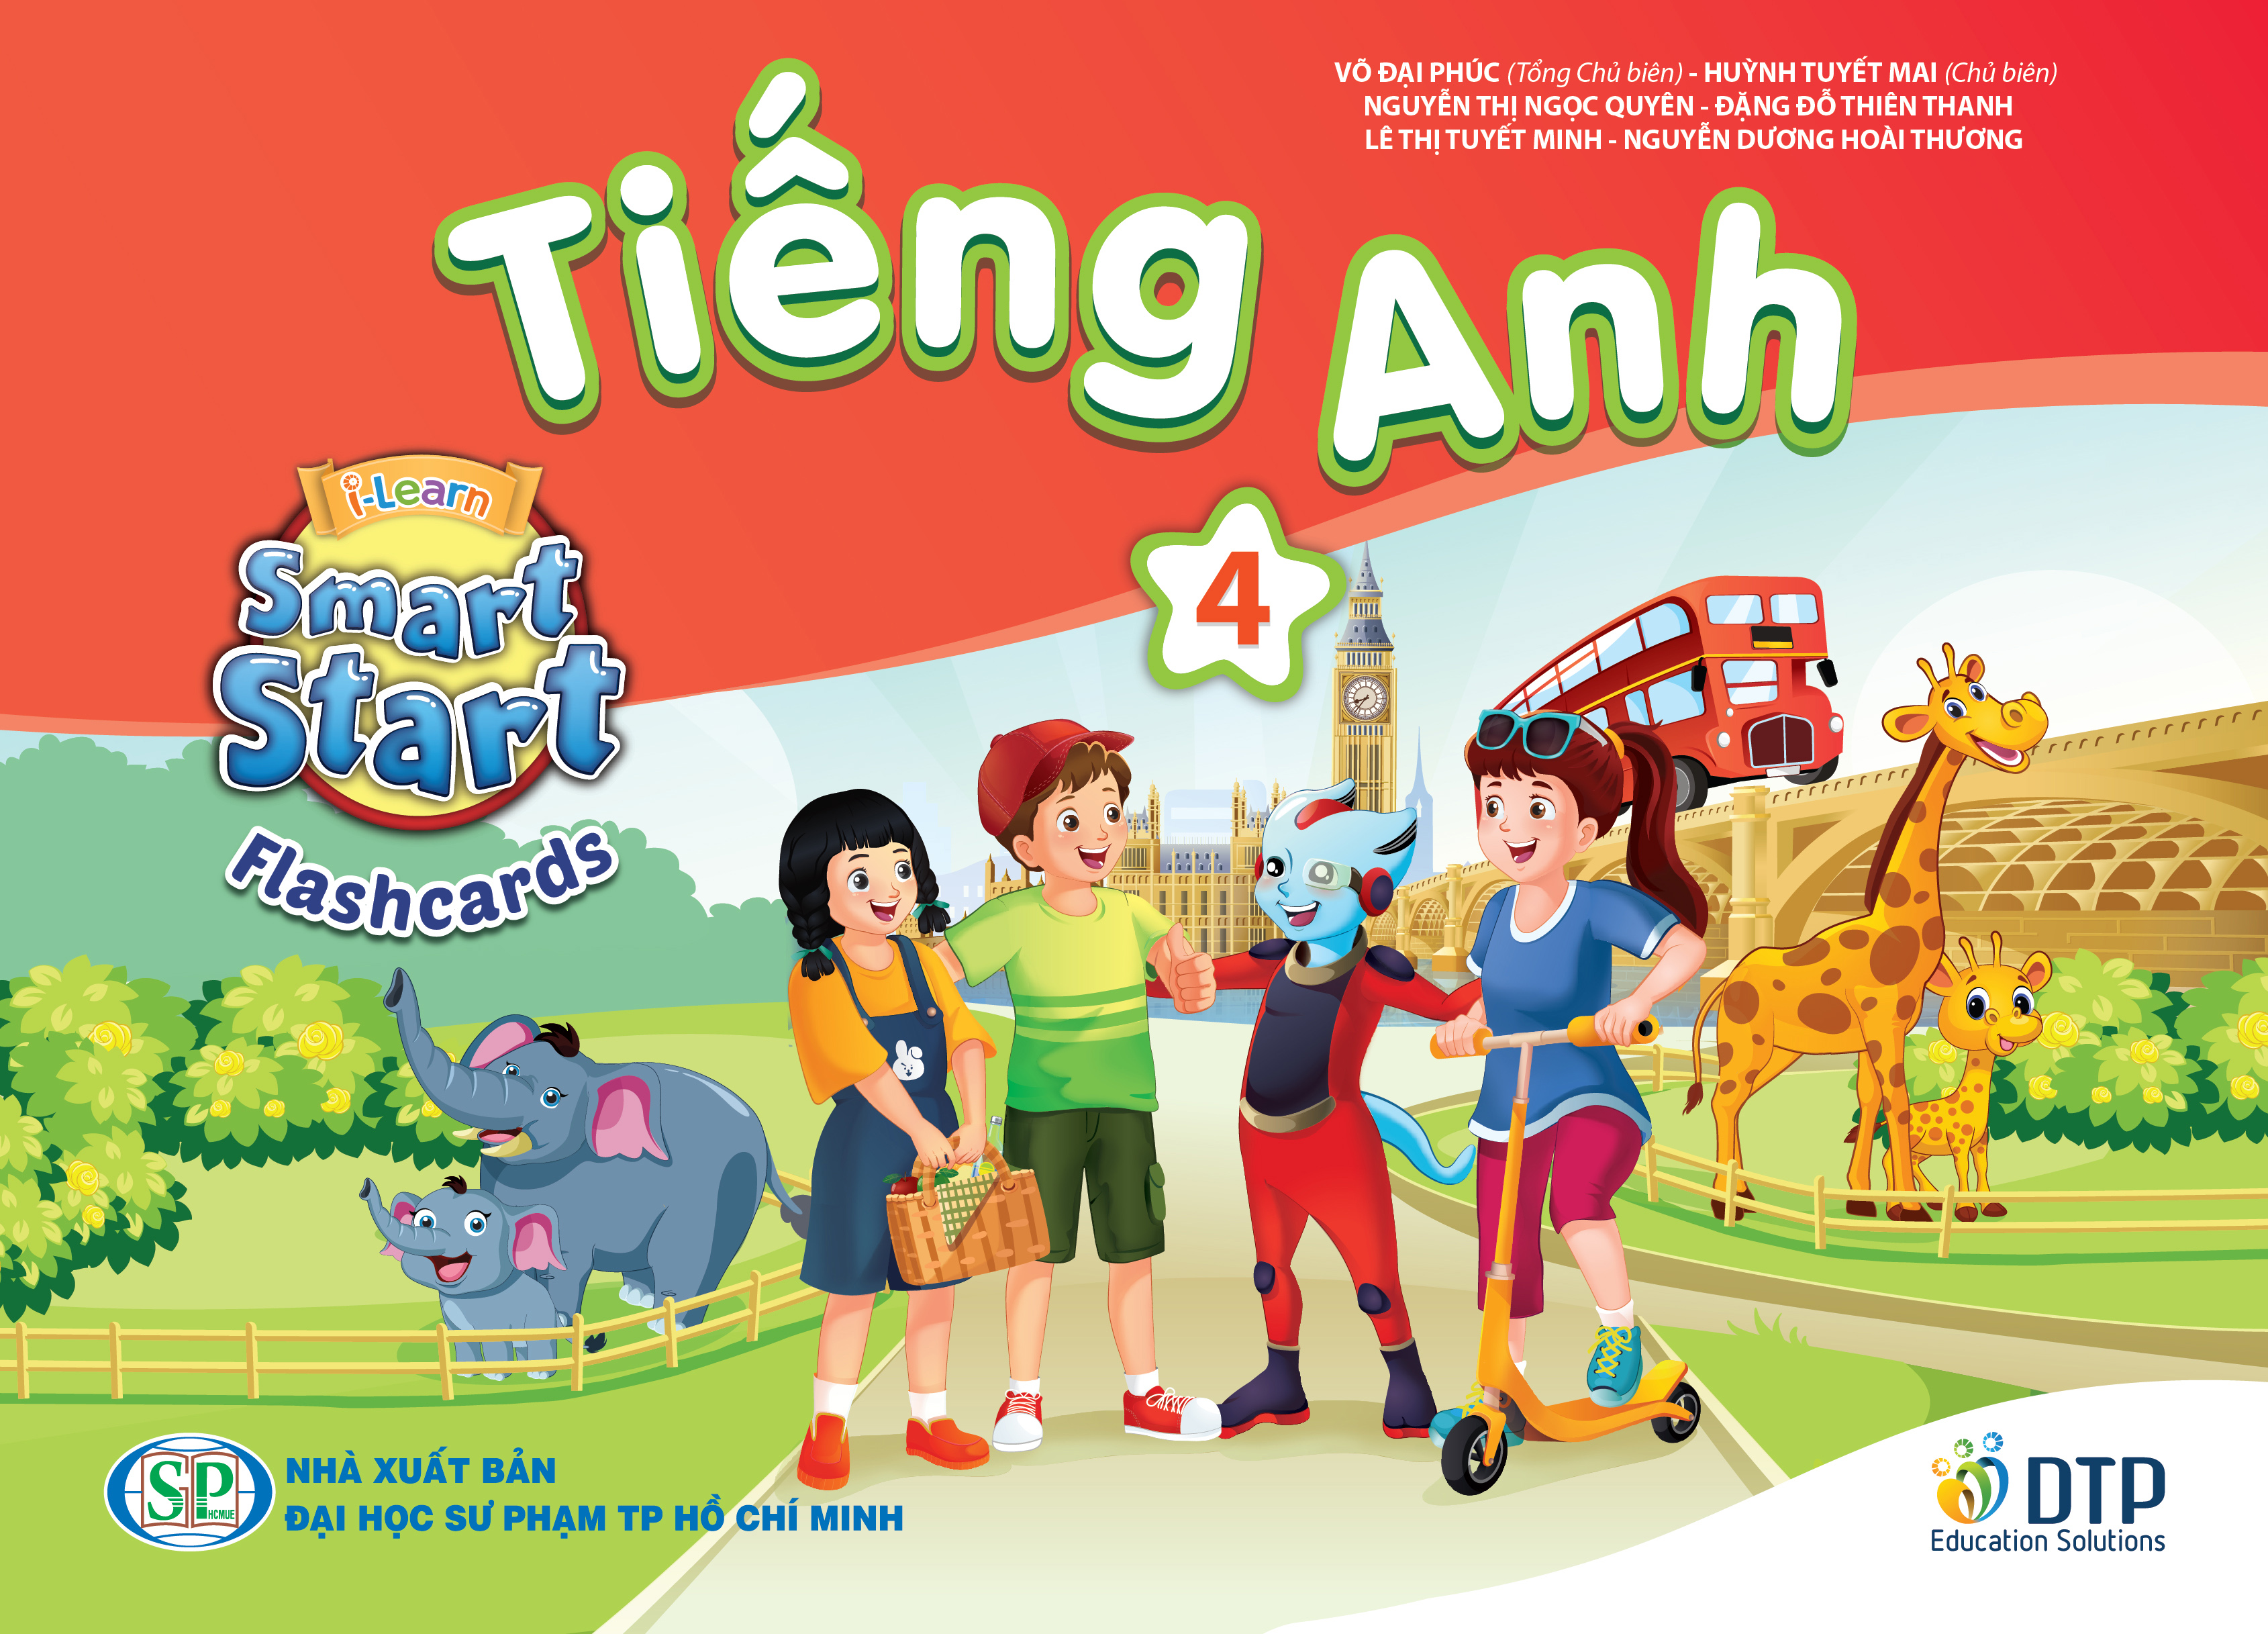 Tiếng Anh 4 i-Learn Smart Start - Flashcards